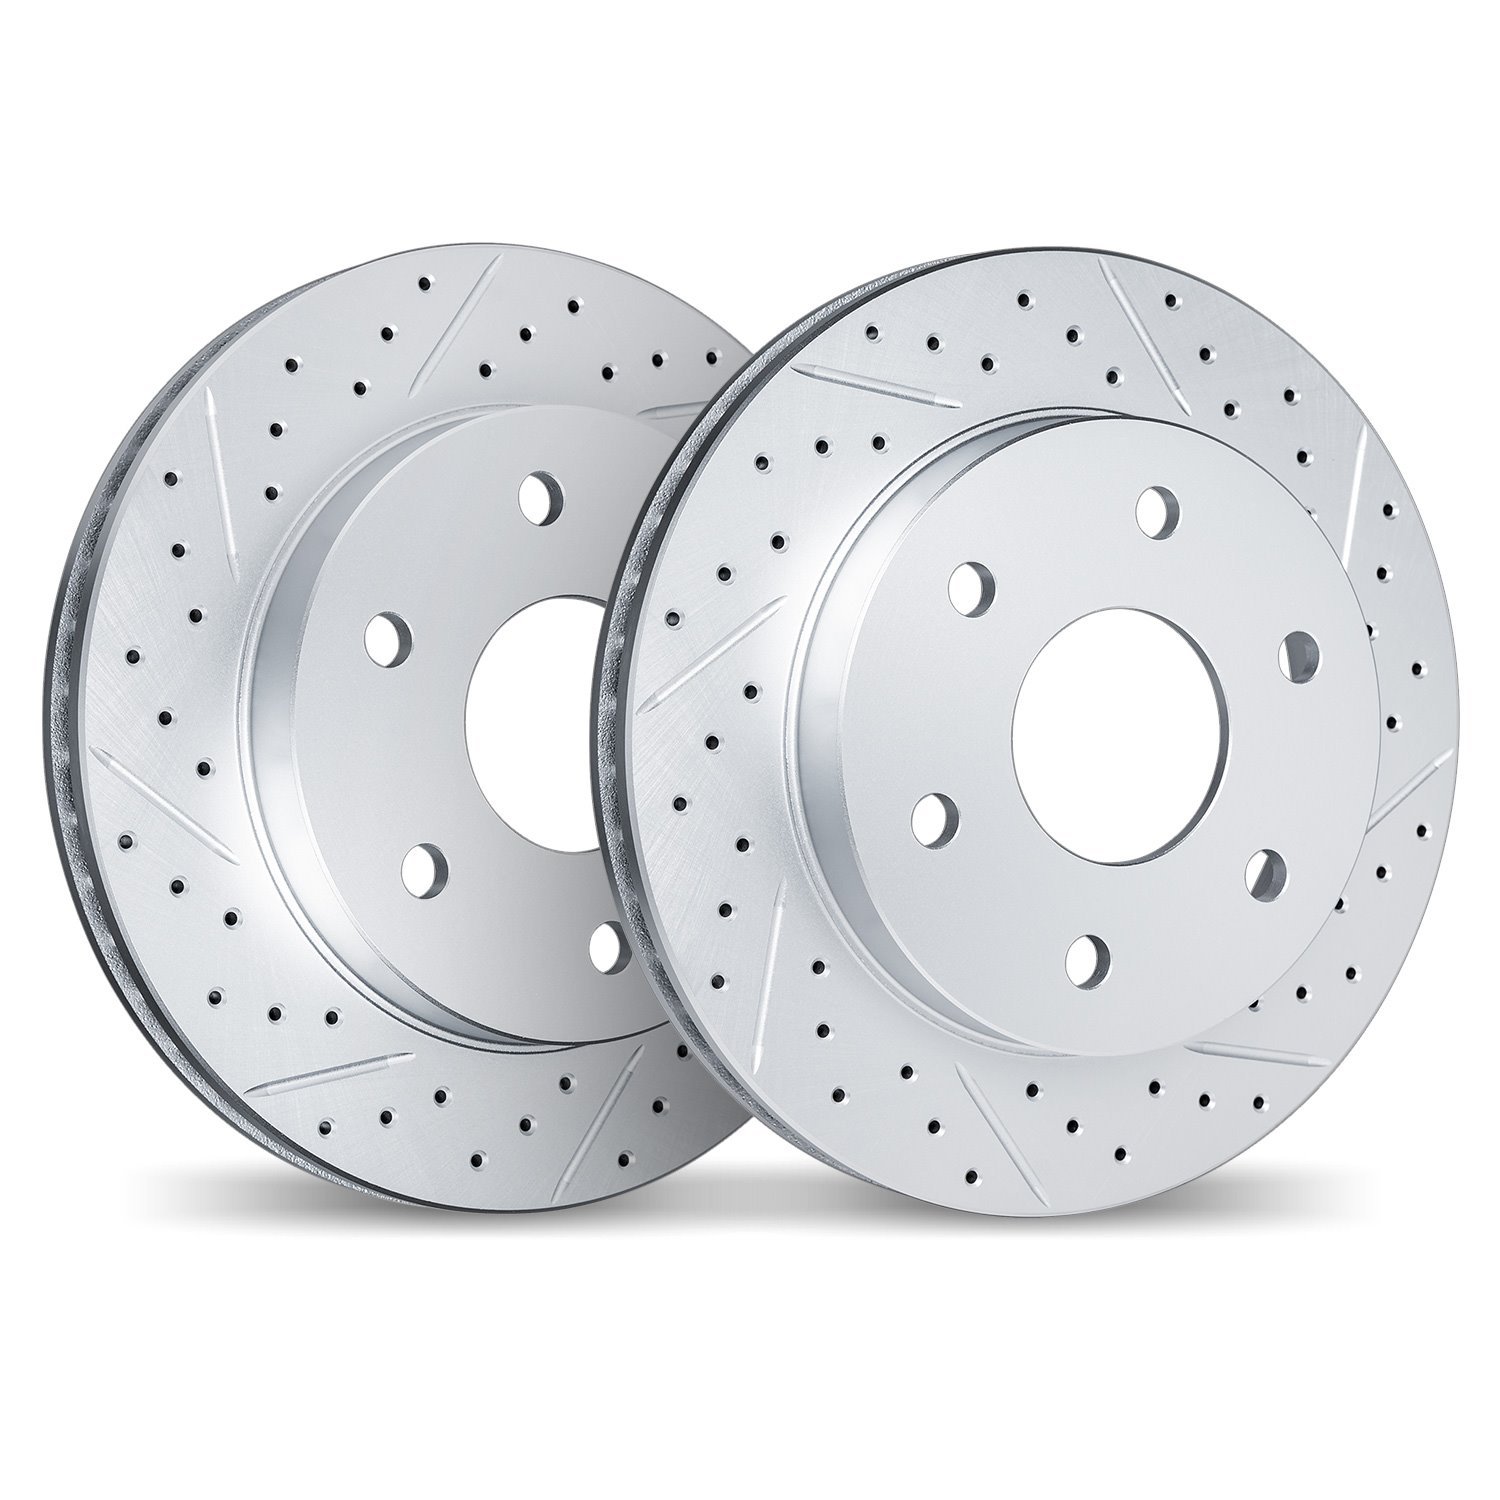 2002-67035 Geoperformance Drilled/Slotted Brake Rotors, 2008-2011 Infiniti/Nissan, Position: Front